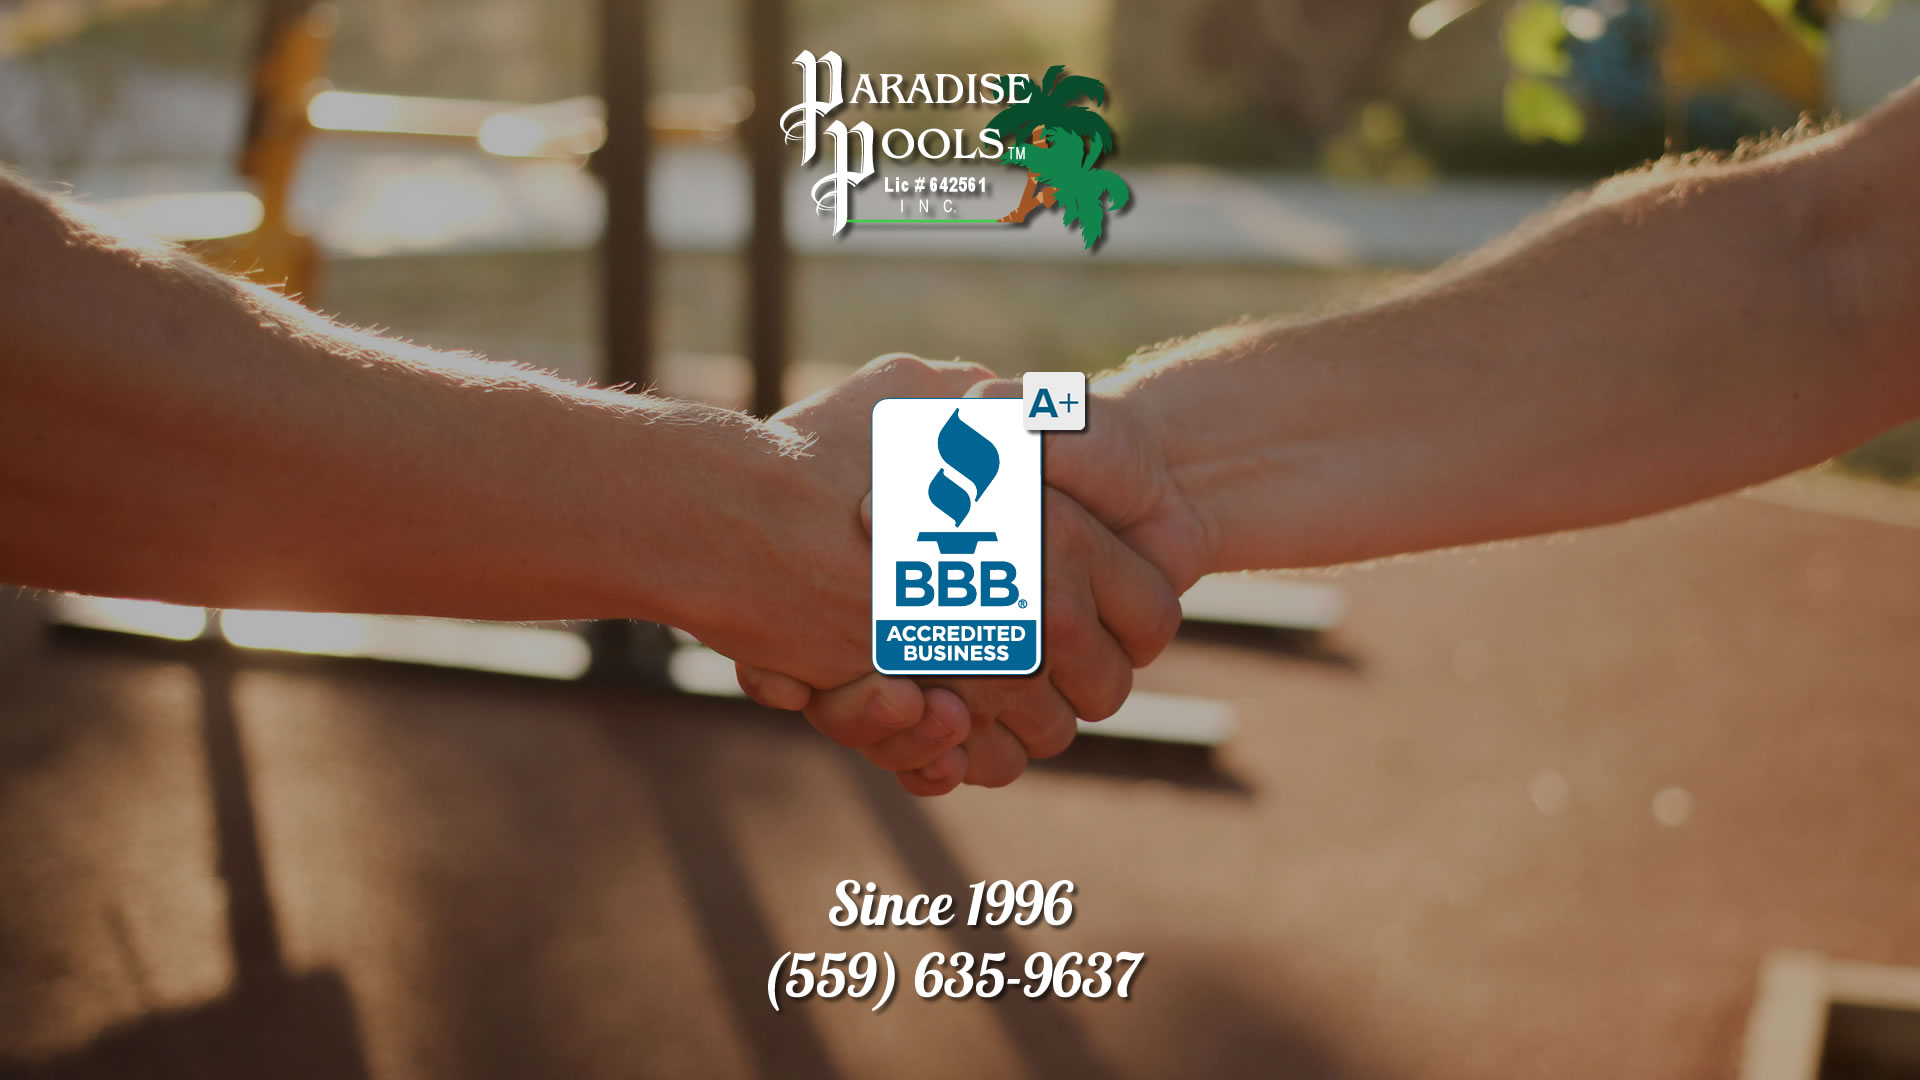 BBB A+ Accredited since 1996 Paradise PoolsTM (559) 635-9637